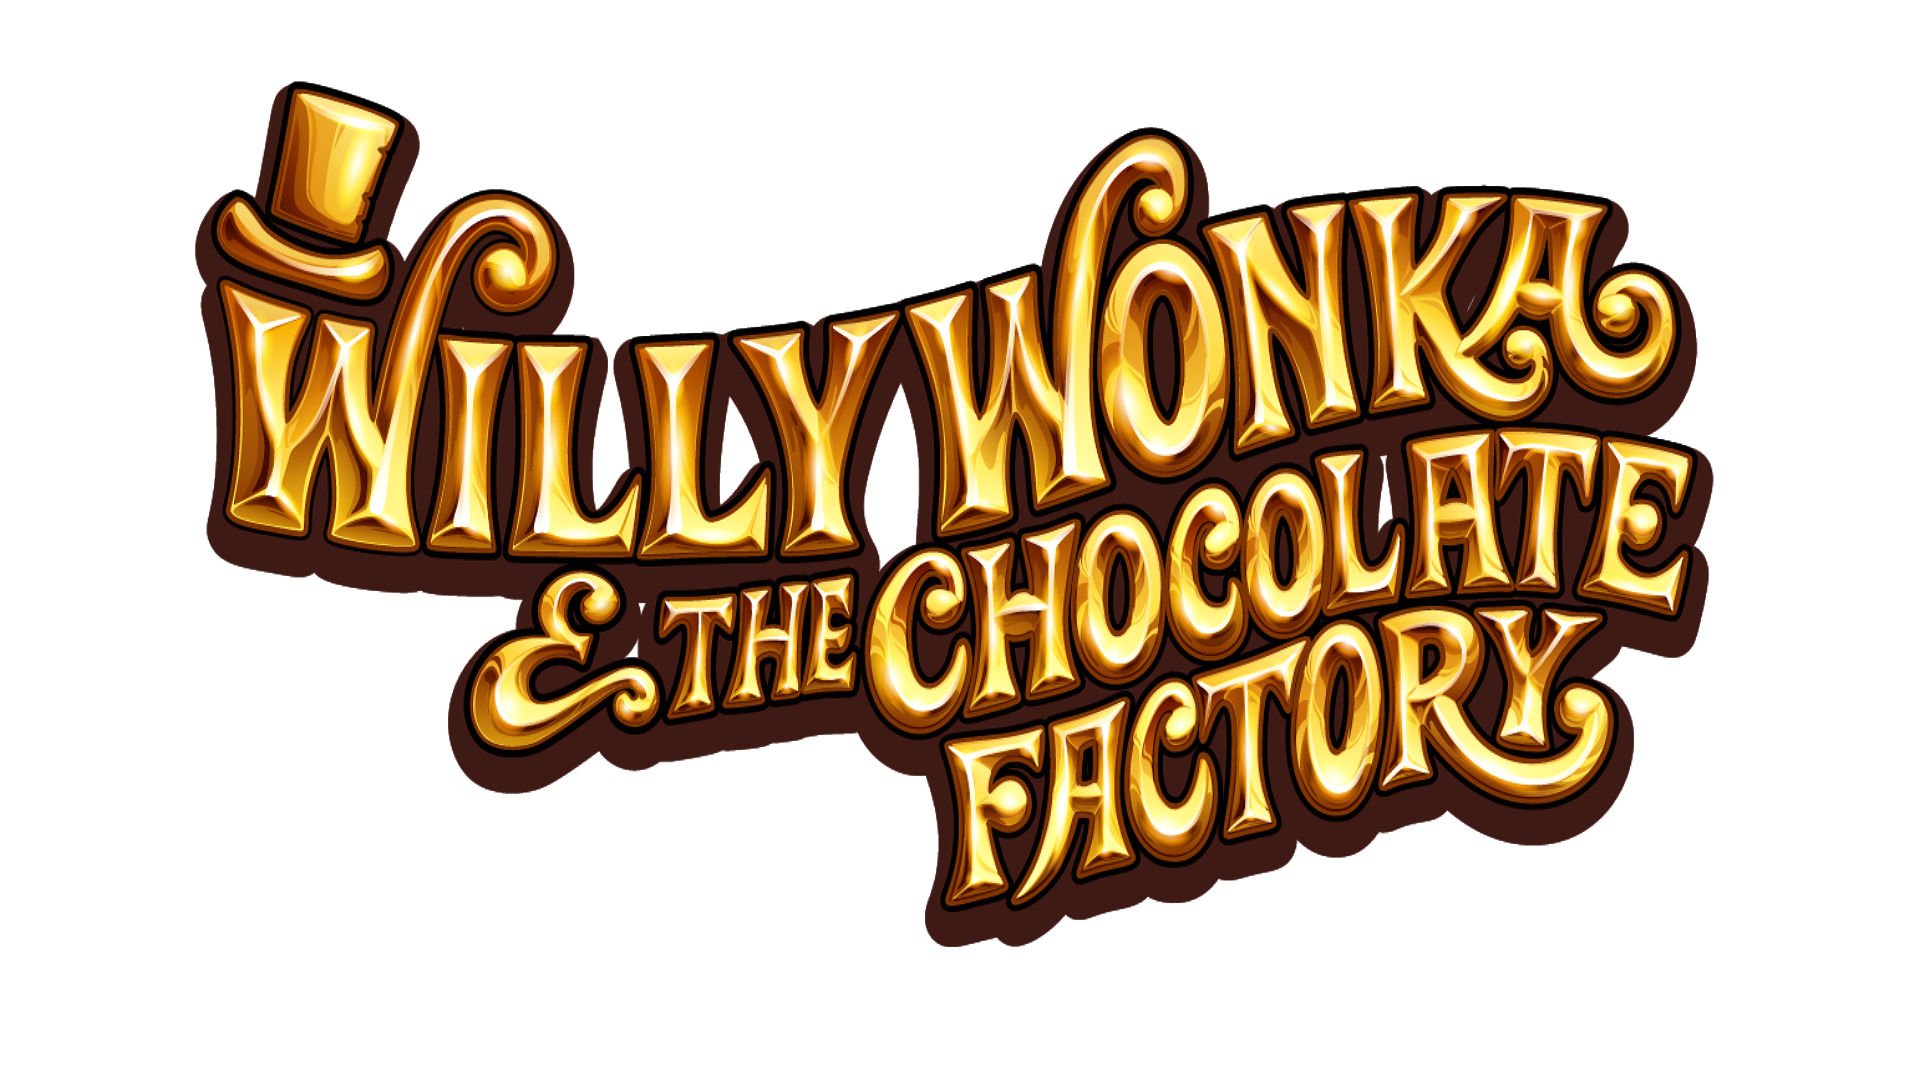 willy, Wonka, Chocolate, Factory, Charlie, Adventure, Family, Comedy Wallpaper HD / Desktop and Mobile Background